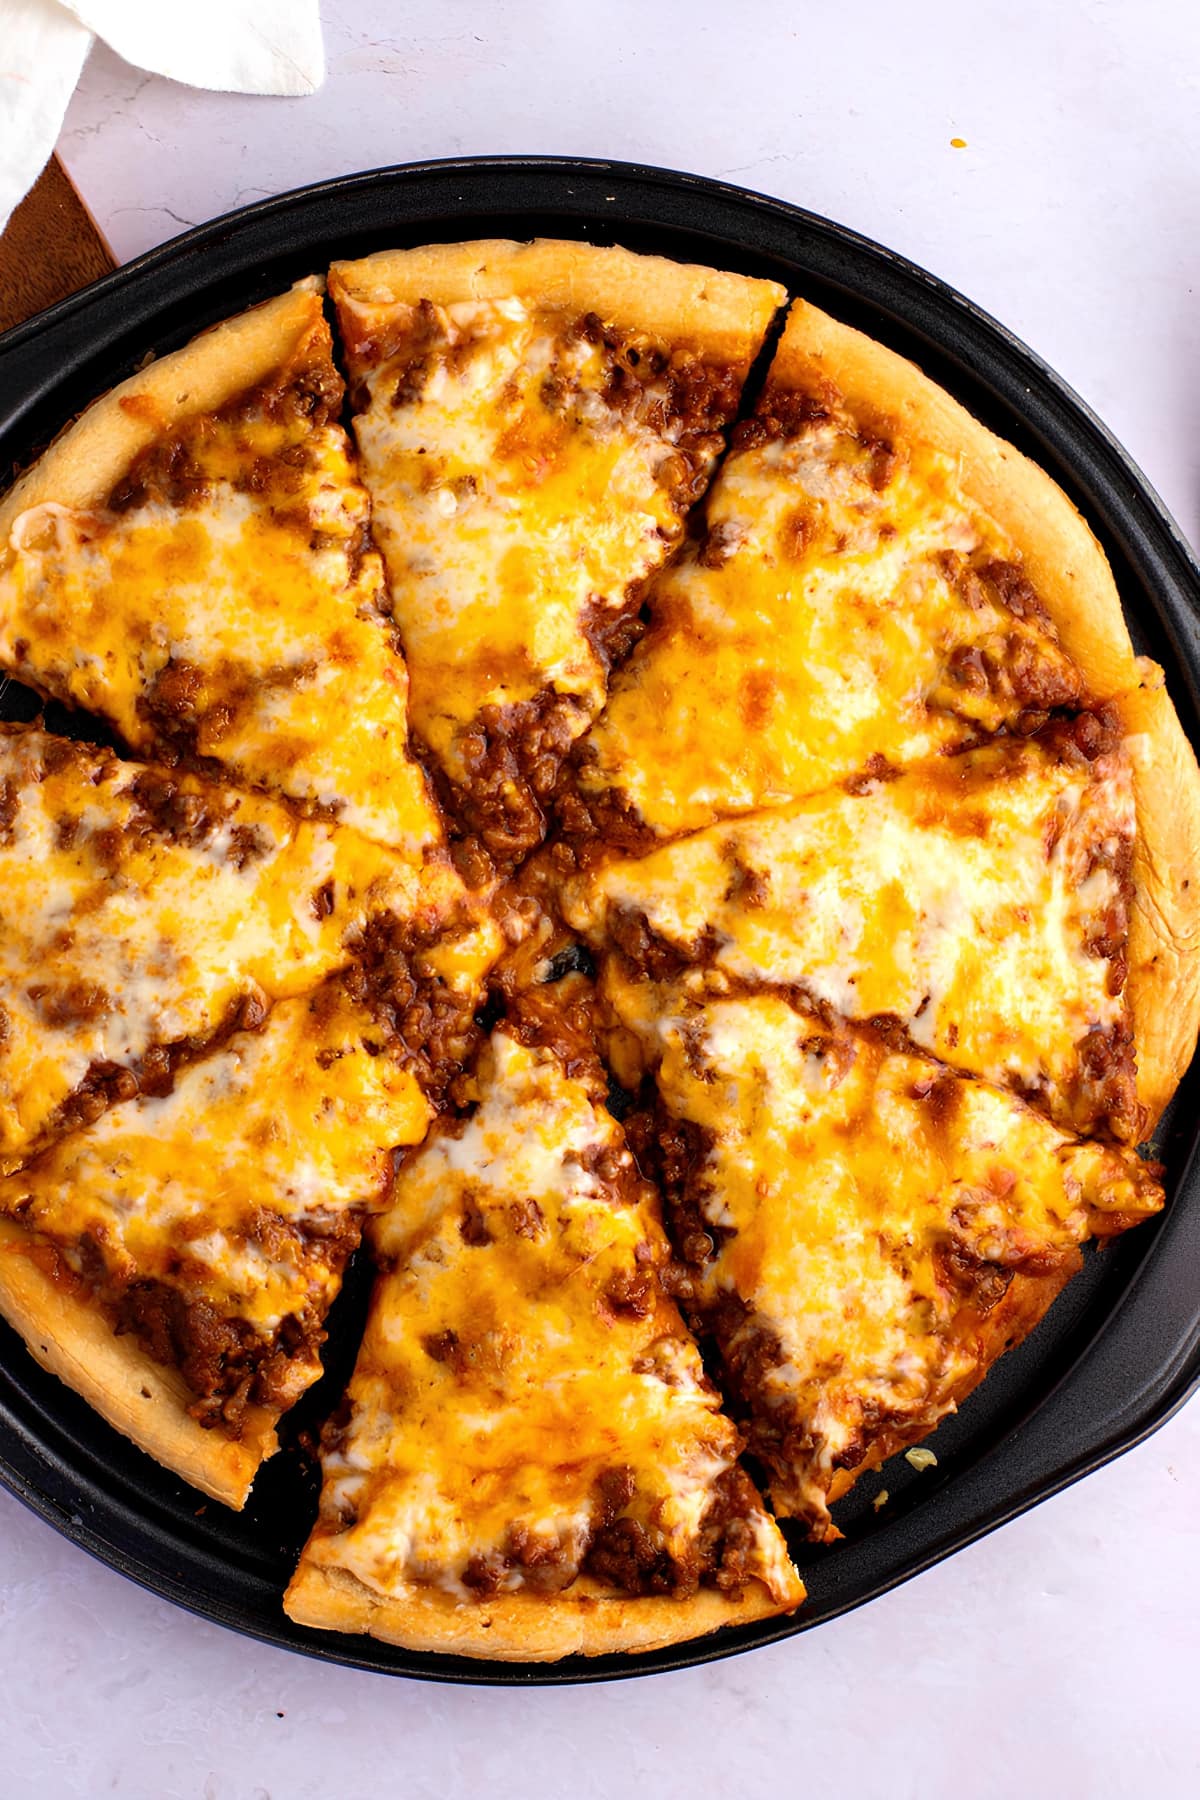 Homemade Sloppy Joes Pizza with Cheese and Ground Beef